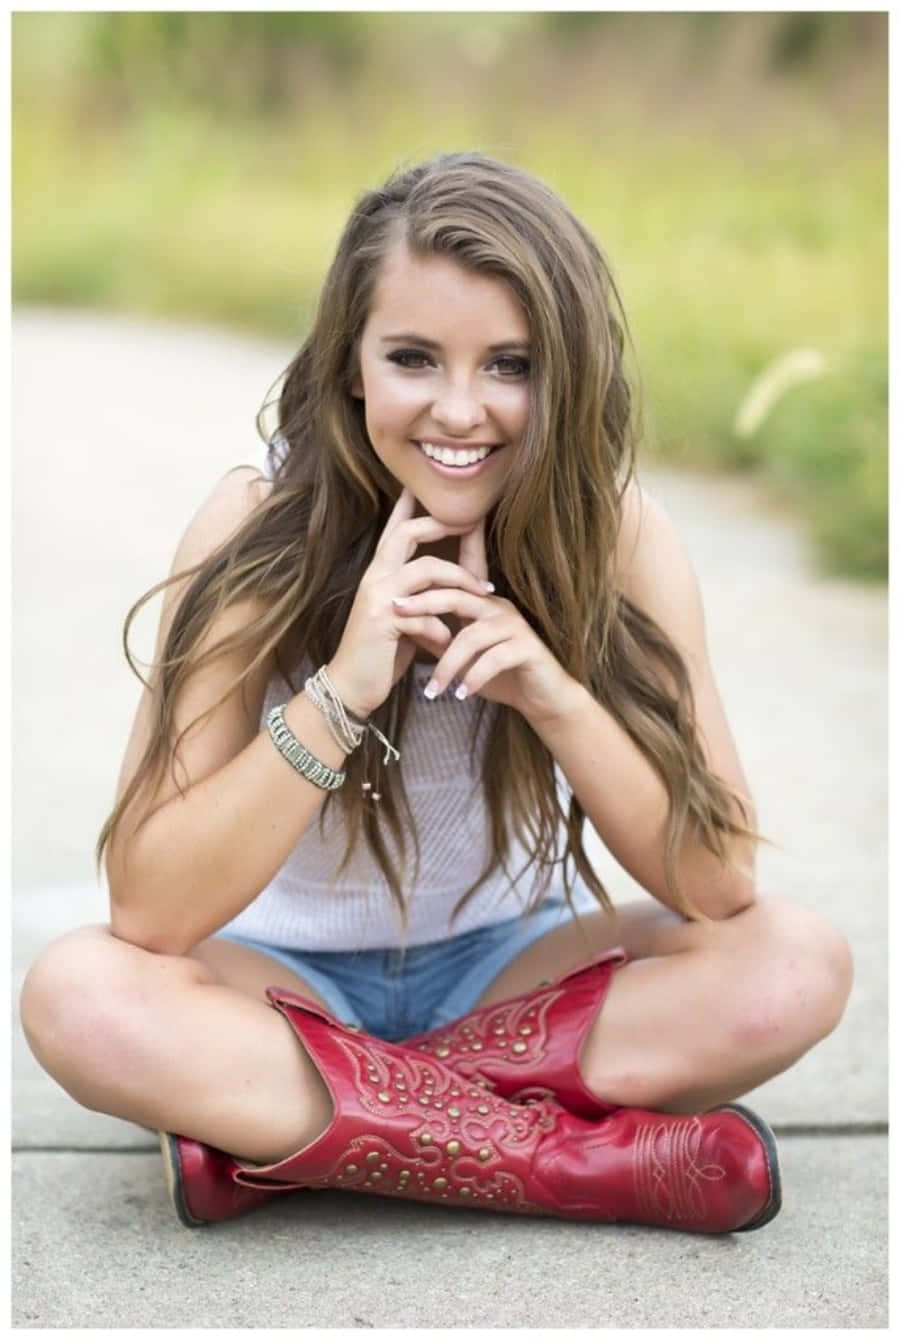 A Girl In Red Cowboy Boots Sitting On The Ground